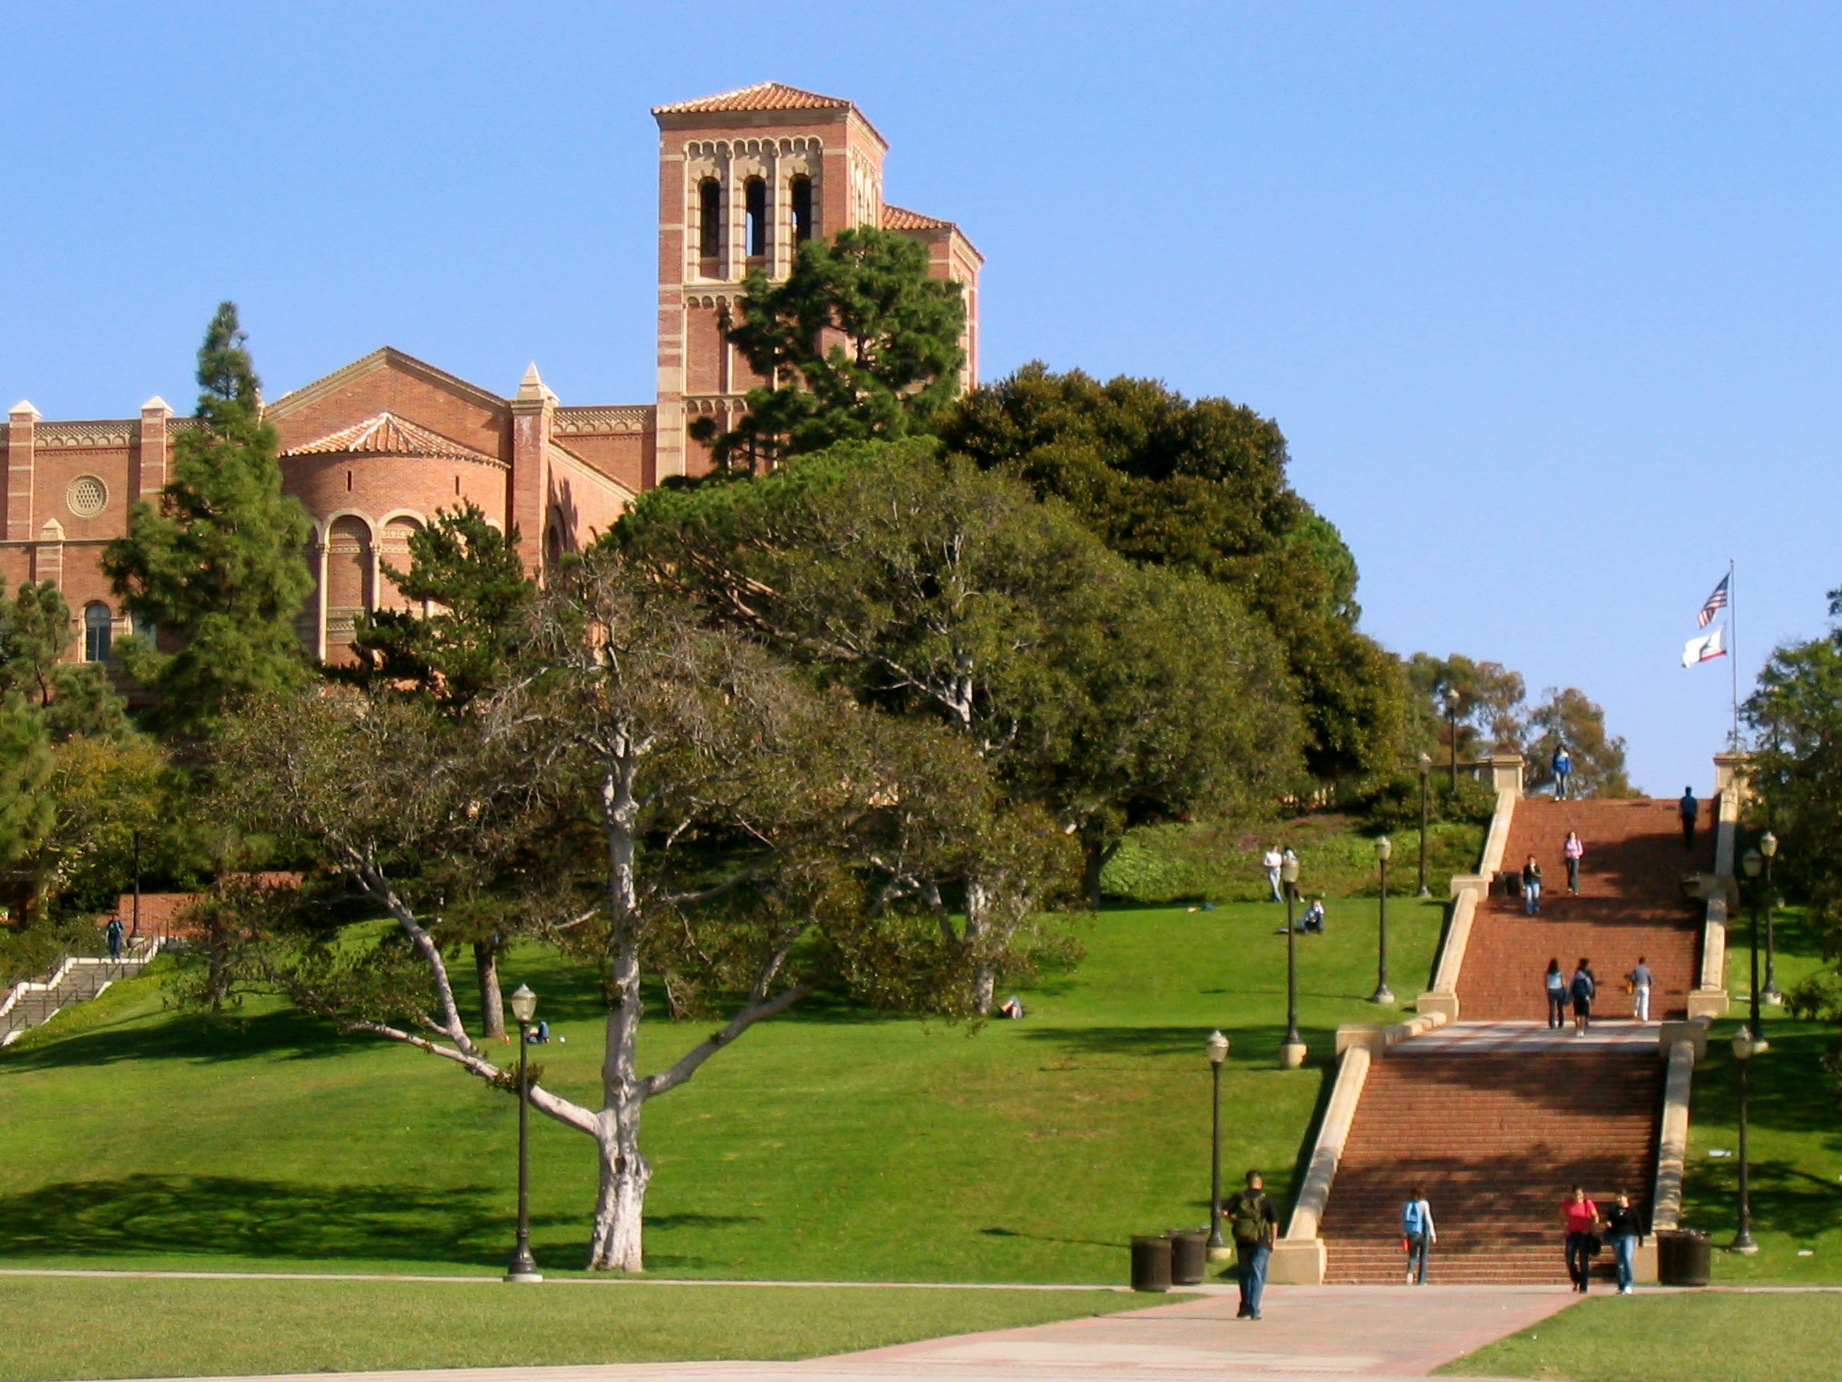 UCLA has the highest amount of testimonies on AMCHA's page. | <a href="https://commons.wikimedia.org/wiki/File:Janss_Steps,_Royce_Hall_in_background,_UCLA.jpg">Supplied by b r e n t (UCLA) [CC BY 2.0], via Wikimedia Commons</a>